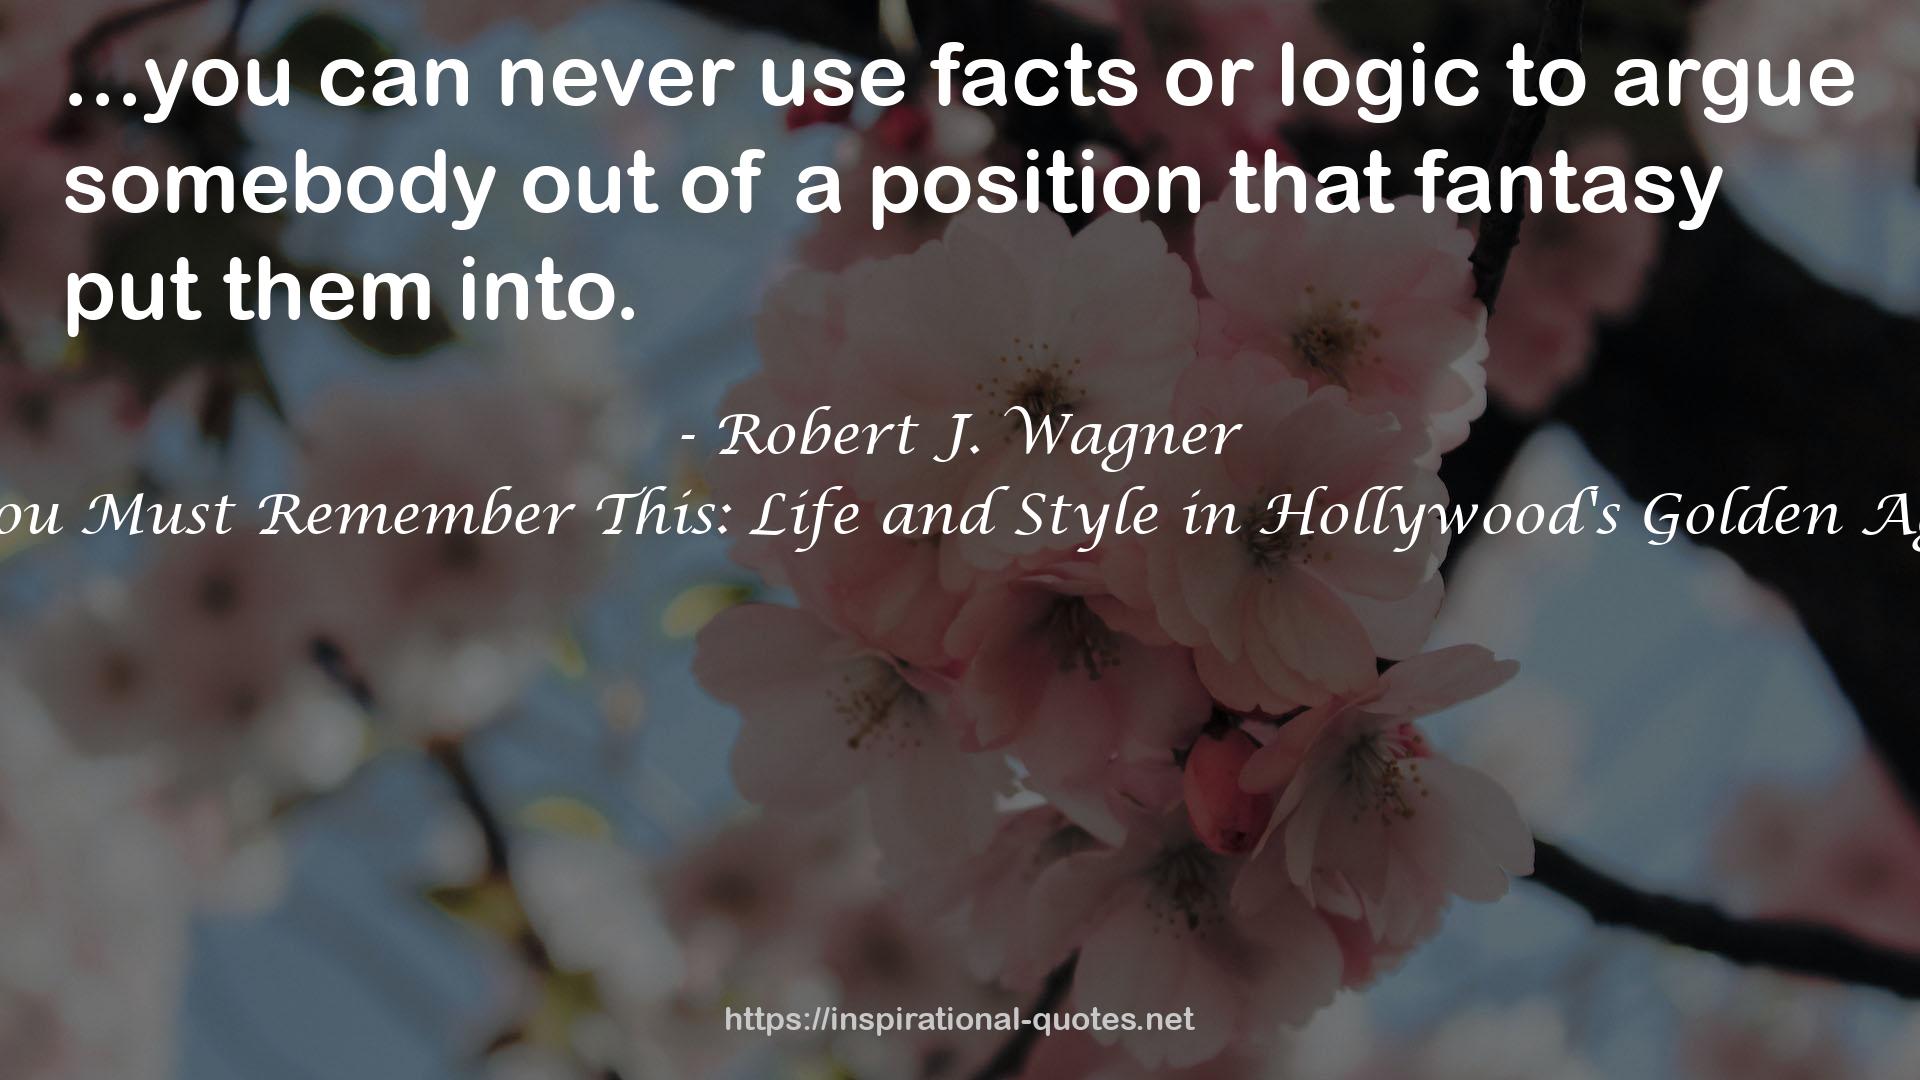 Robert J. Wagner QUOTES